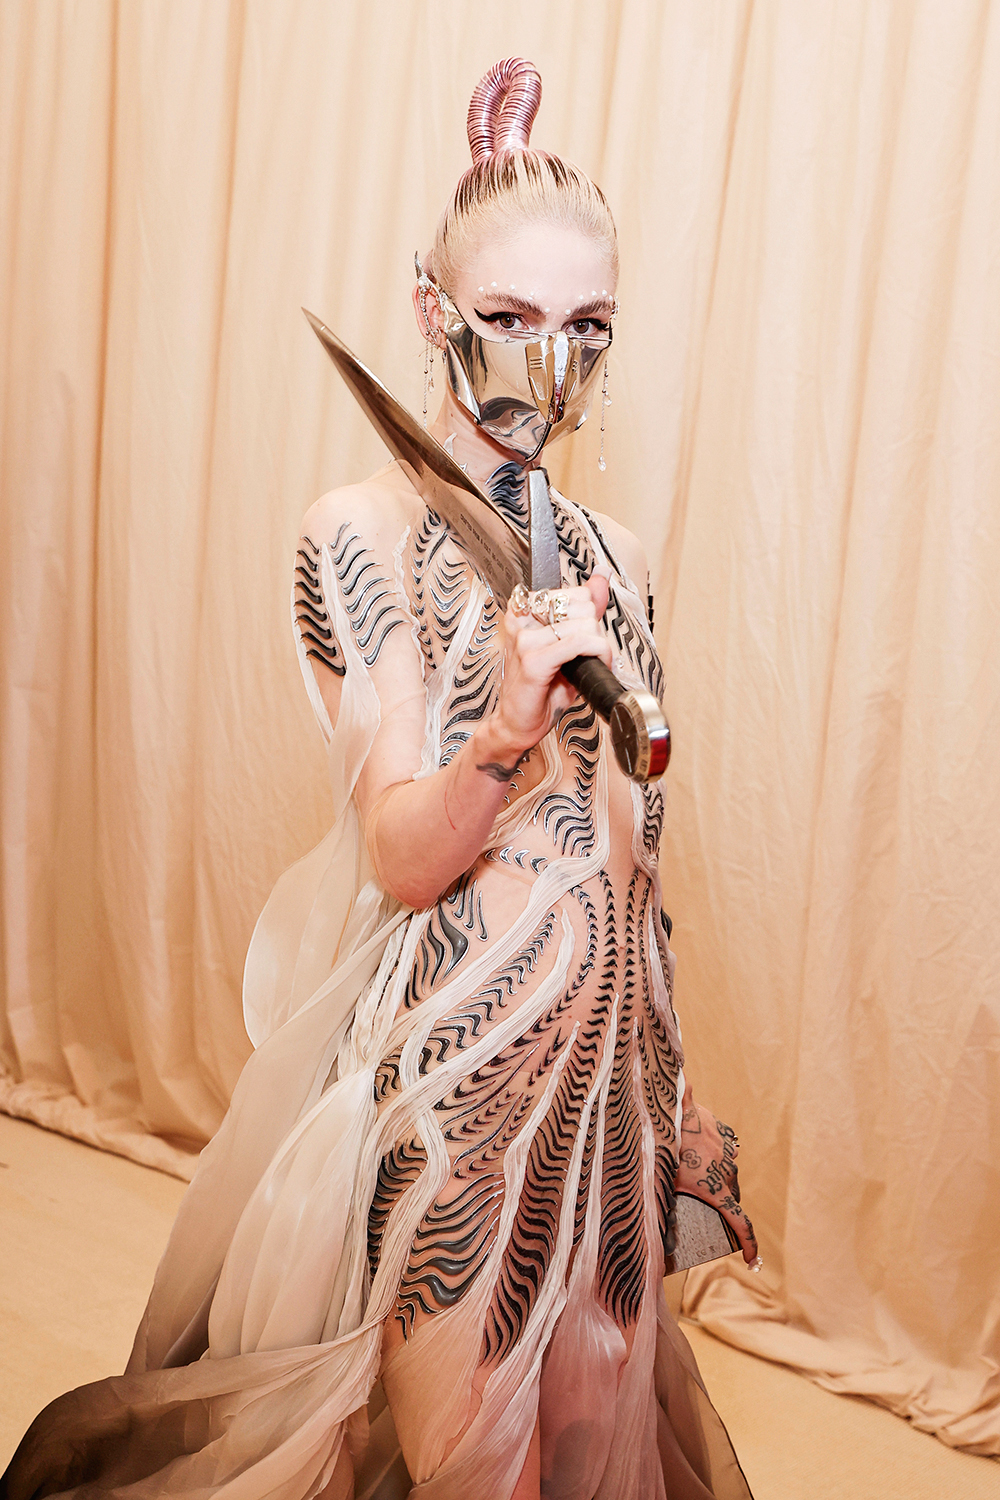 1340171872 - Grimes attends The 2021 Met Gala Celebrating In America: A Lexicon Of Fashion at Metropolitan Museum of Art on September 13, 2021 in New York City. Credito: Arturo Holmes/MG21/Getty Images